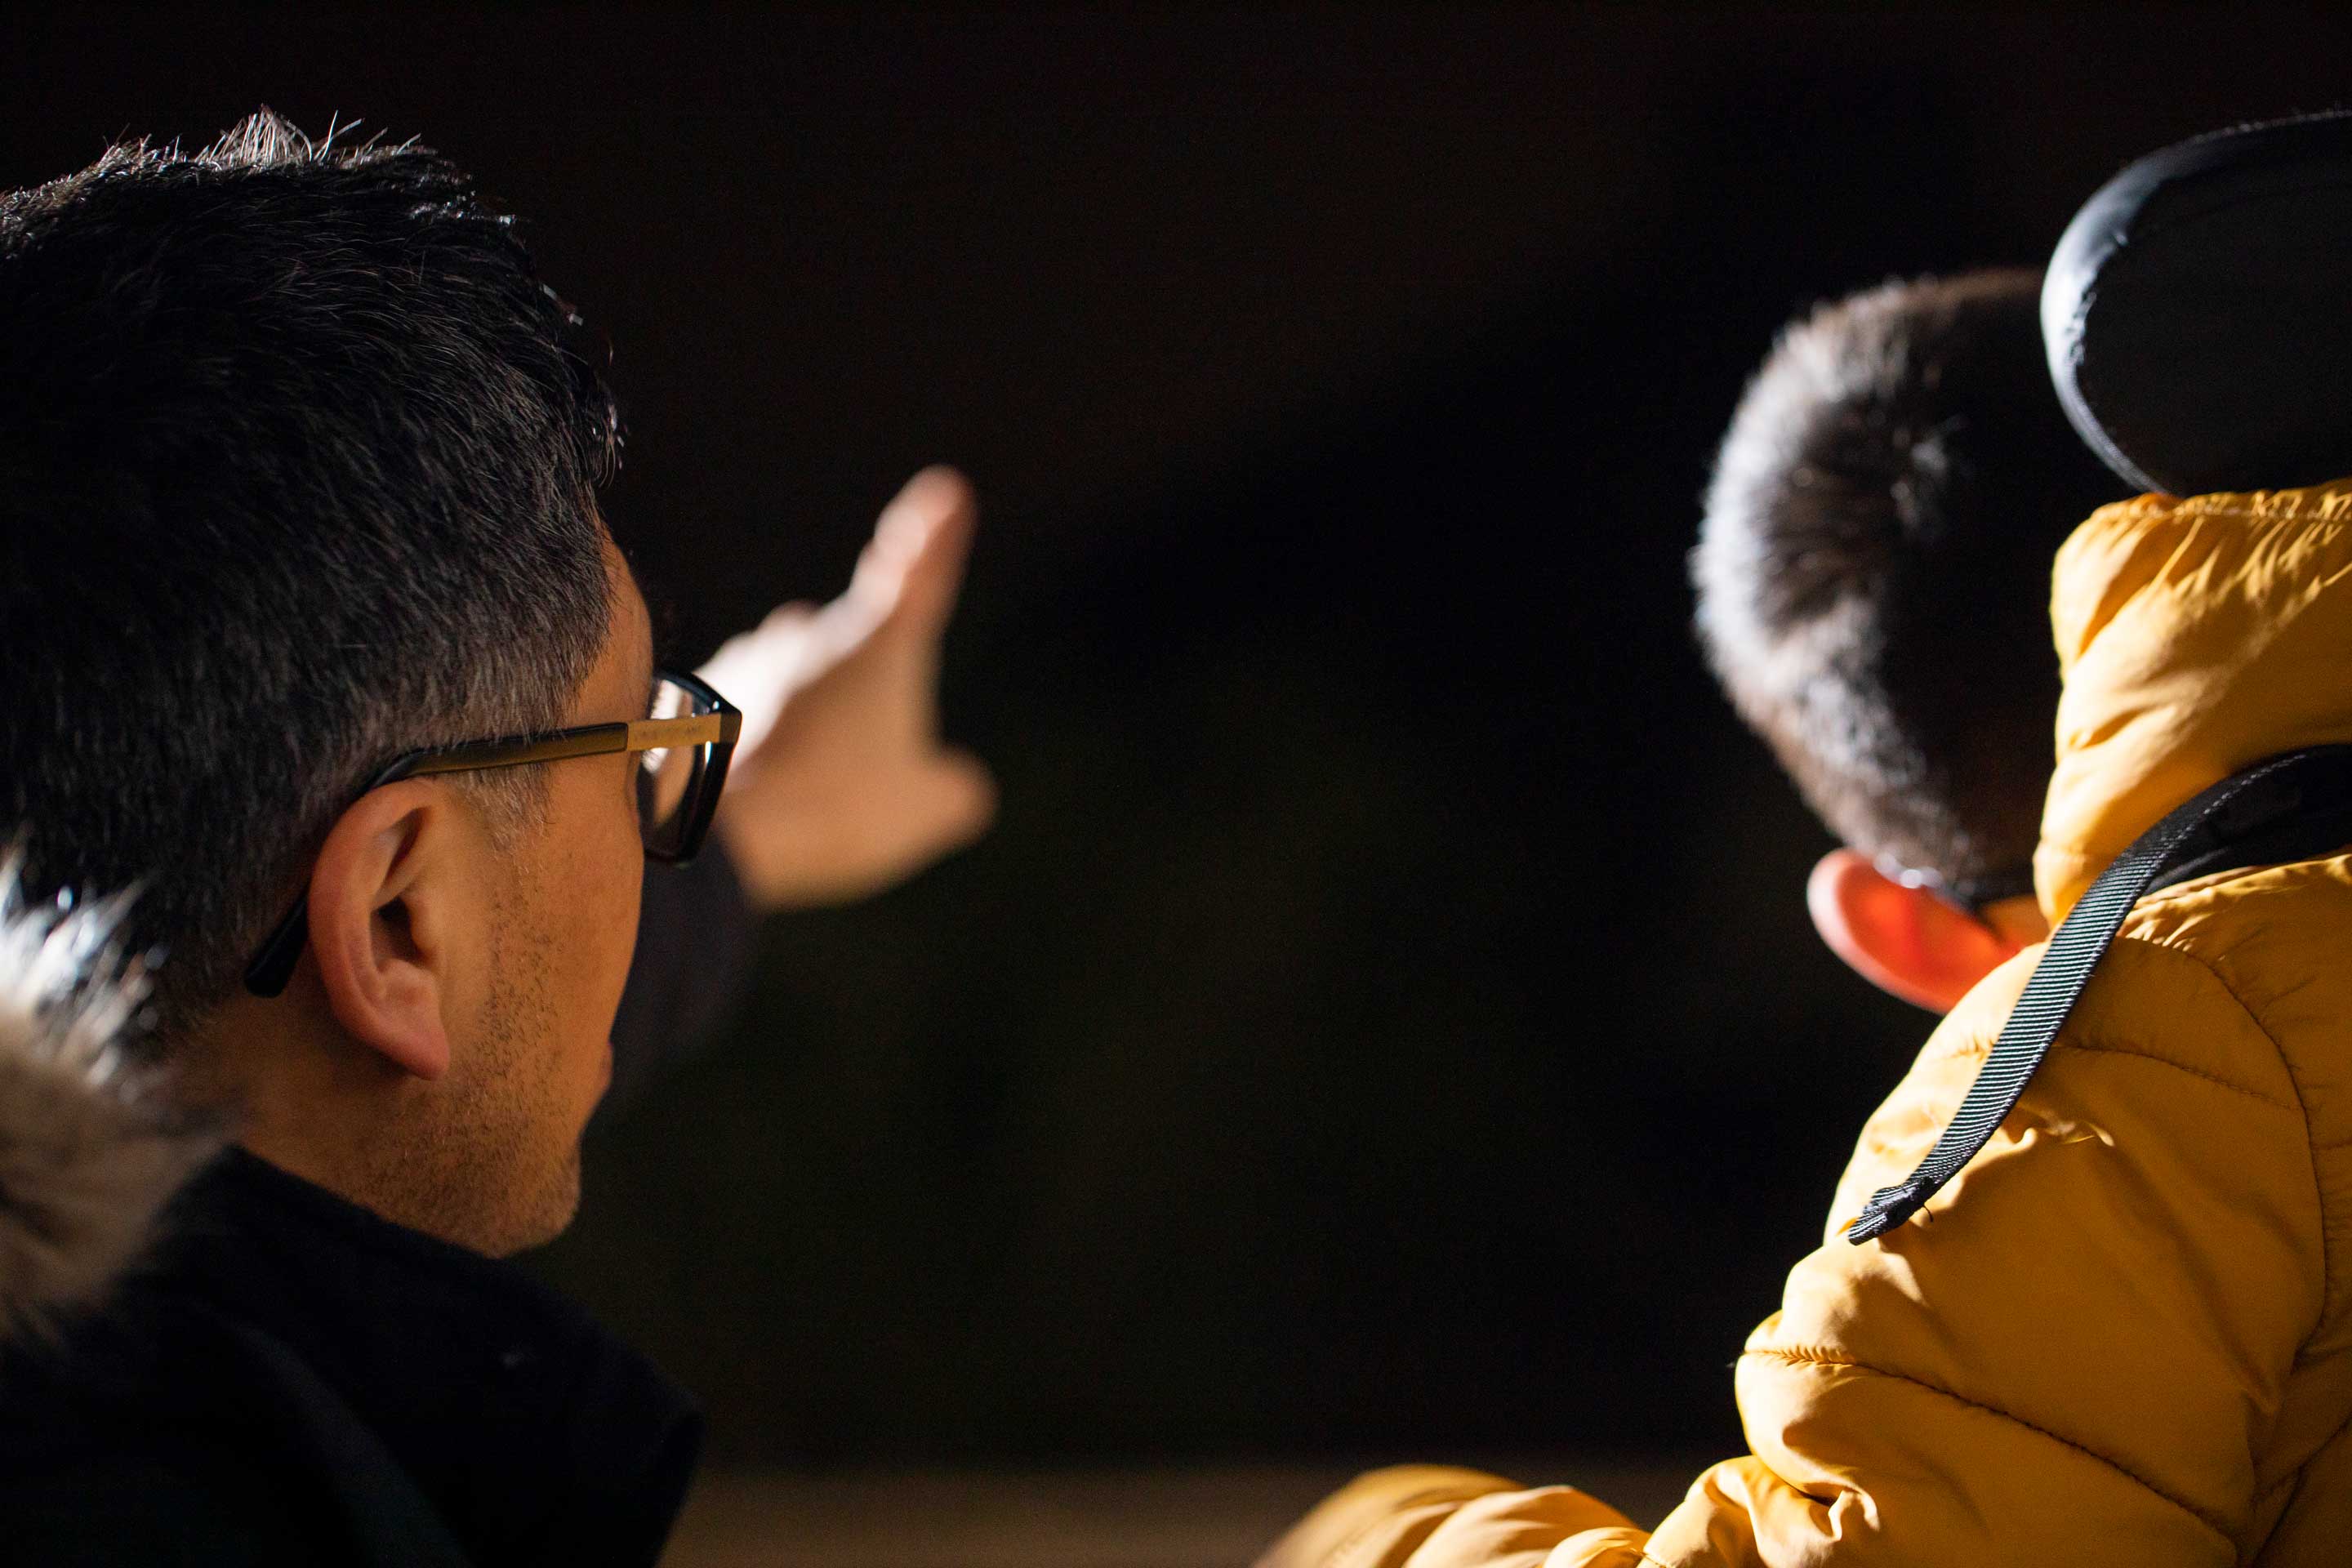 A man and child look into a dark sky, with the man pointing up